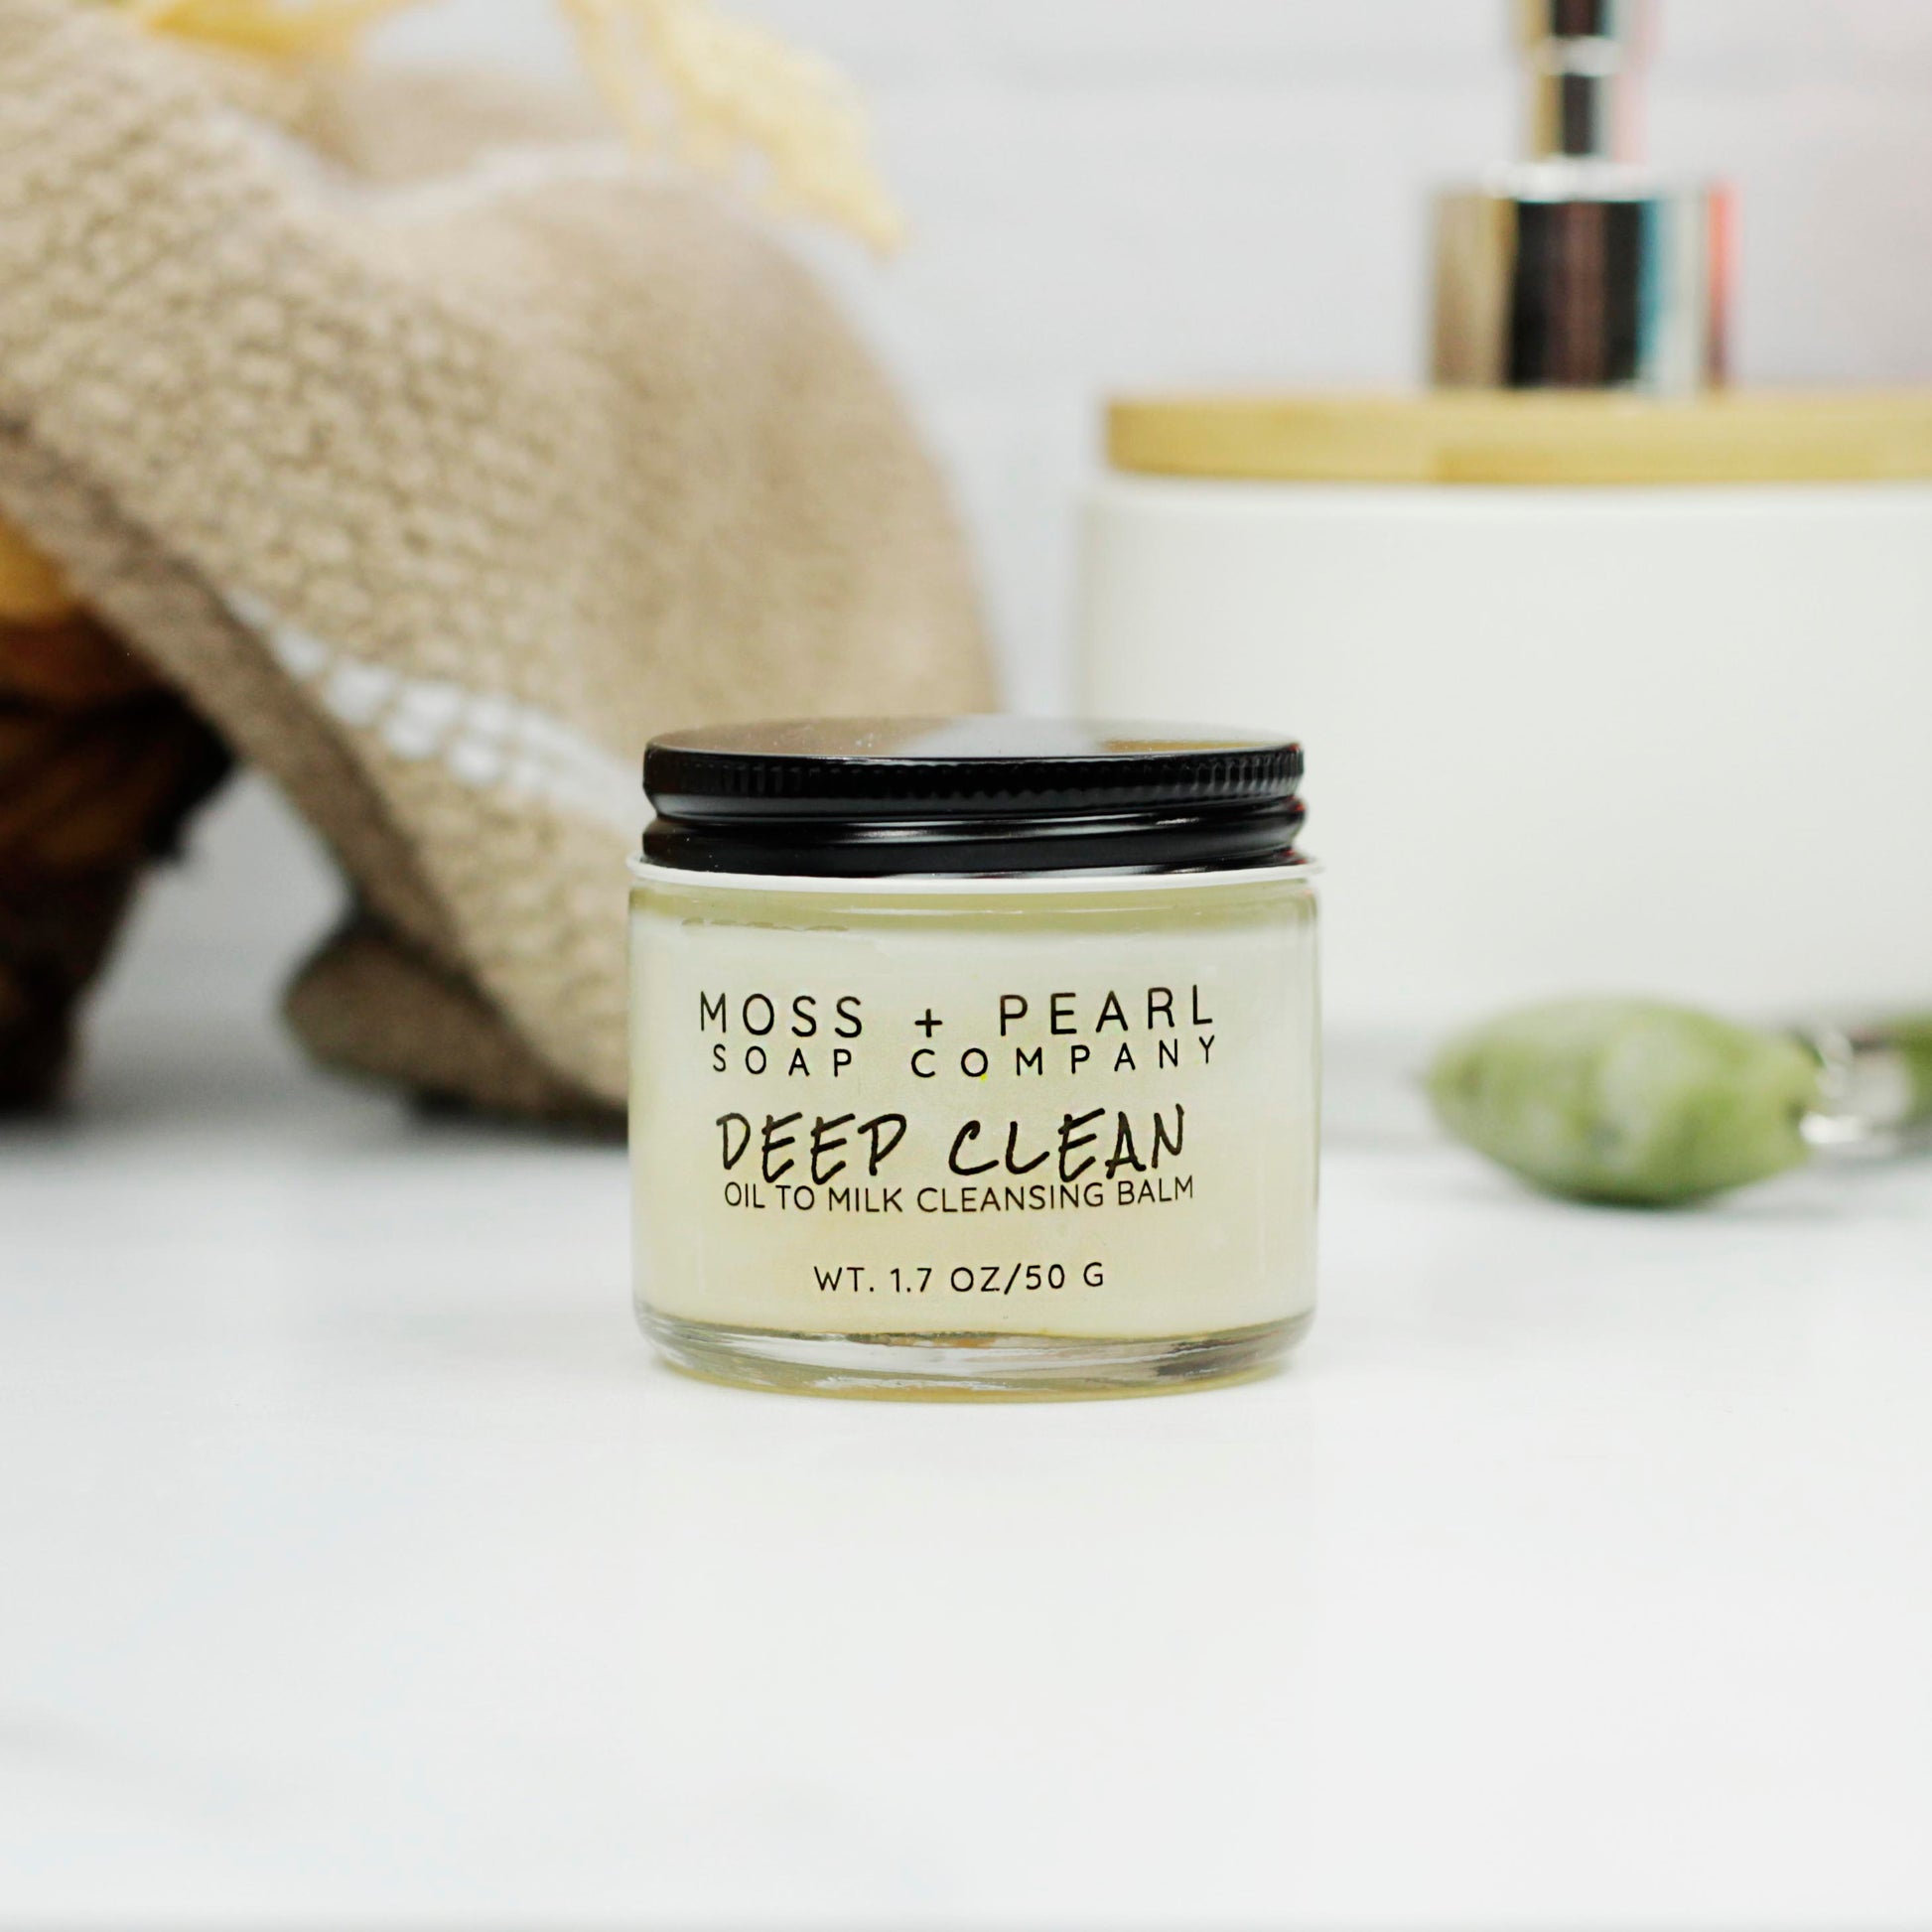 DEEP CLEAN CLEANSING BALM Moss + Pearl Soap Company